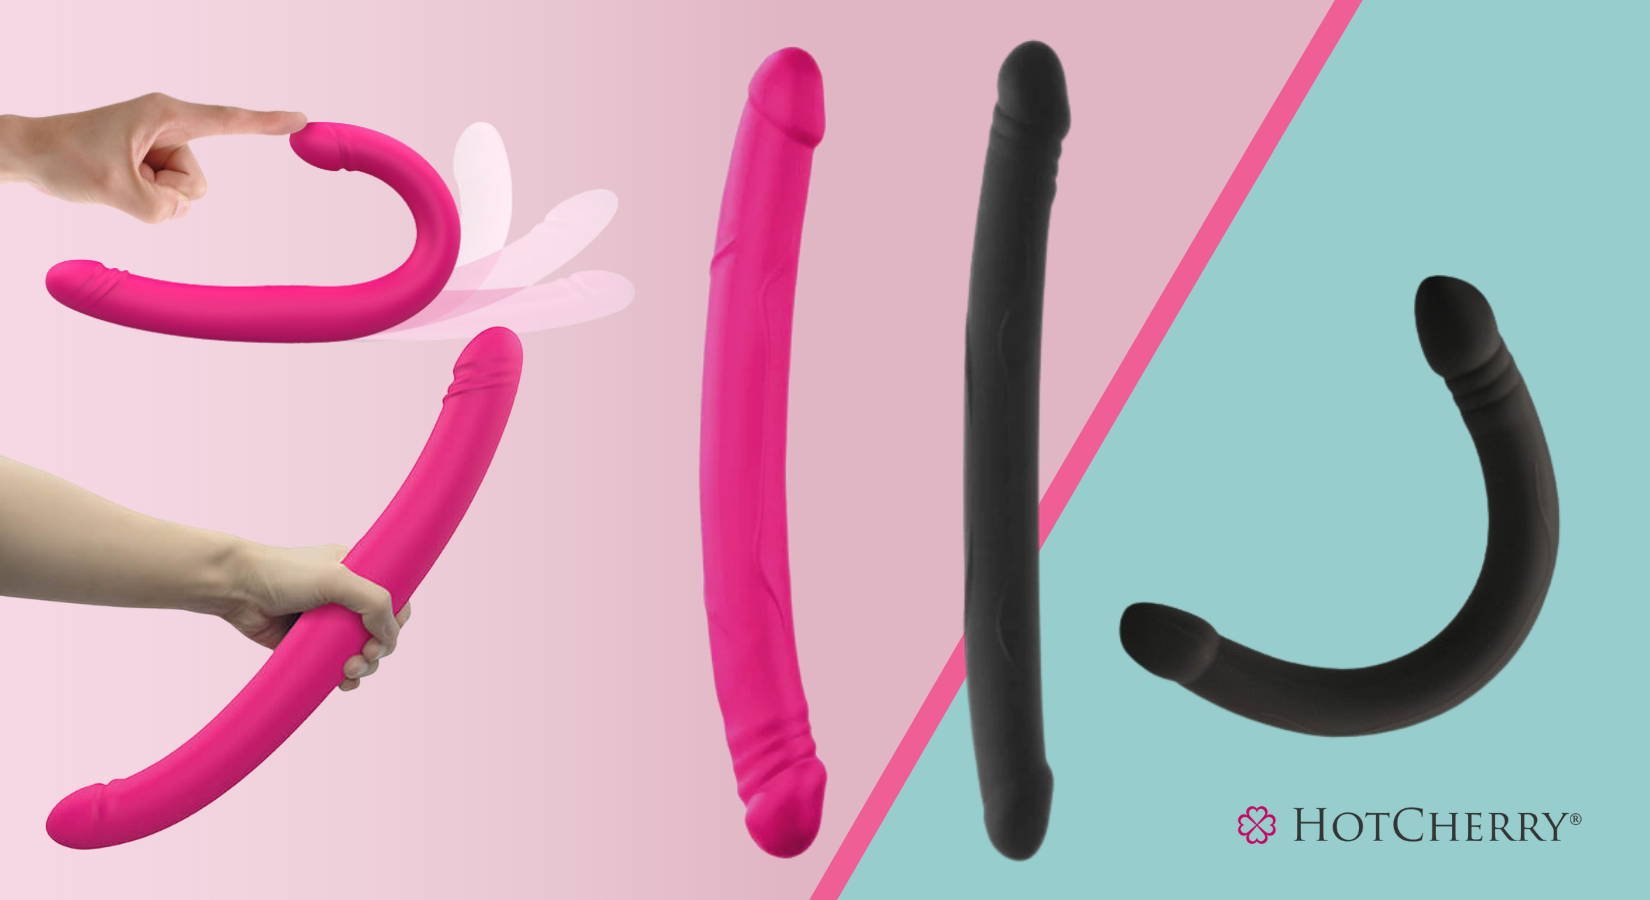 Dorcel Silicone Double Ended Dildo